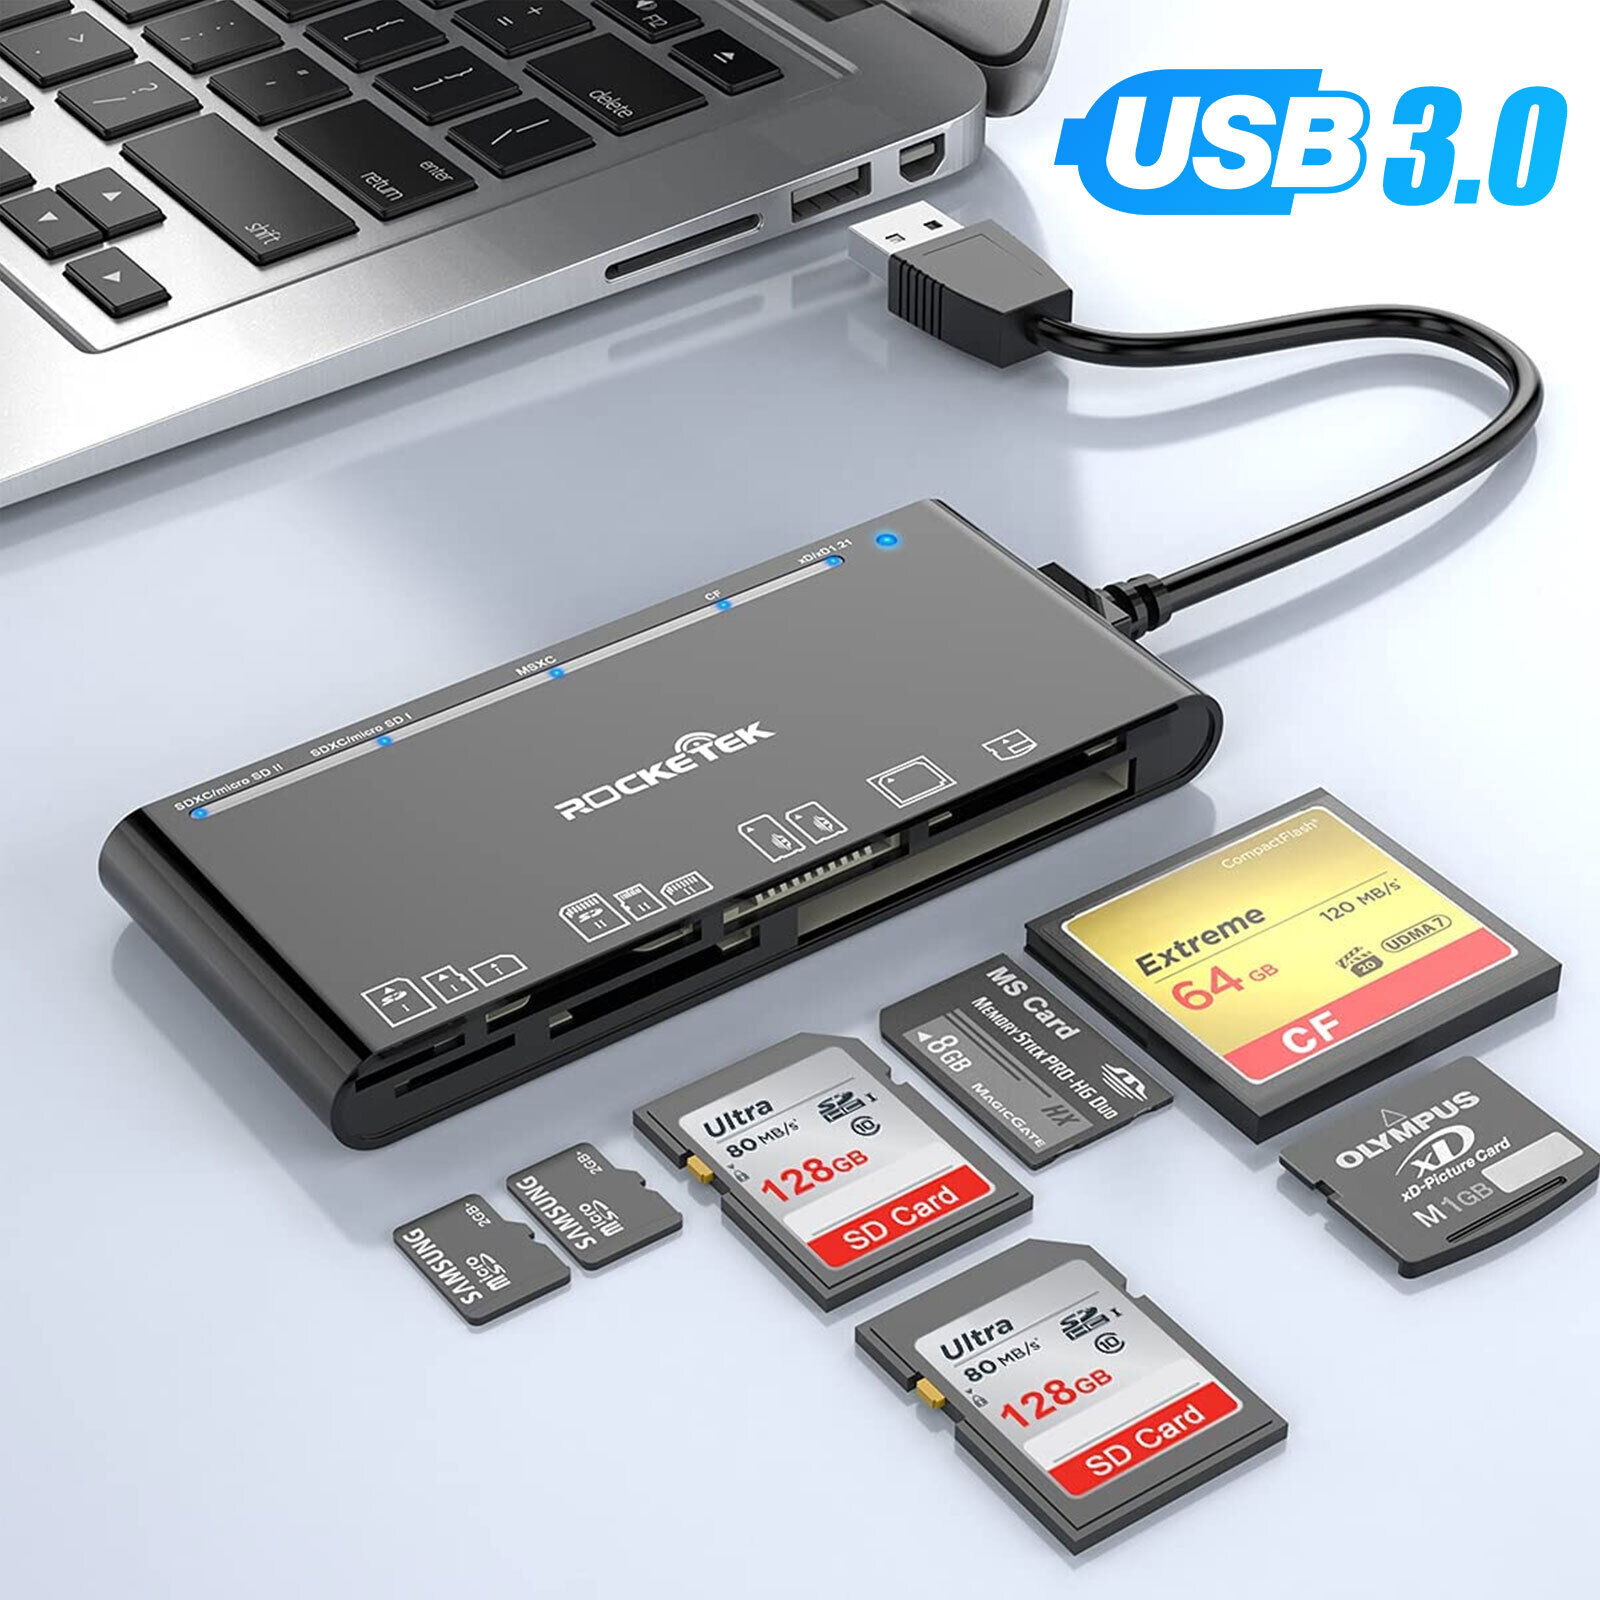 7-IN-1 USB 3.0 Memory Card Reader High-Speed Adapter for Micro SD SDXC CF SDHC